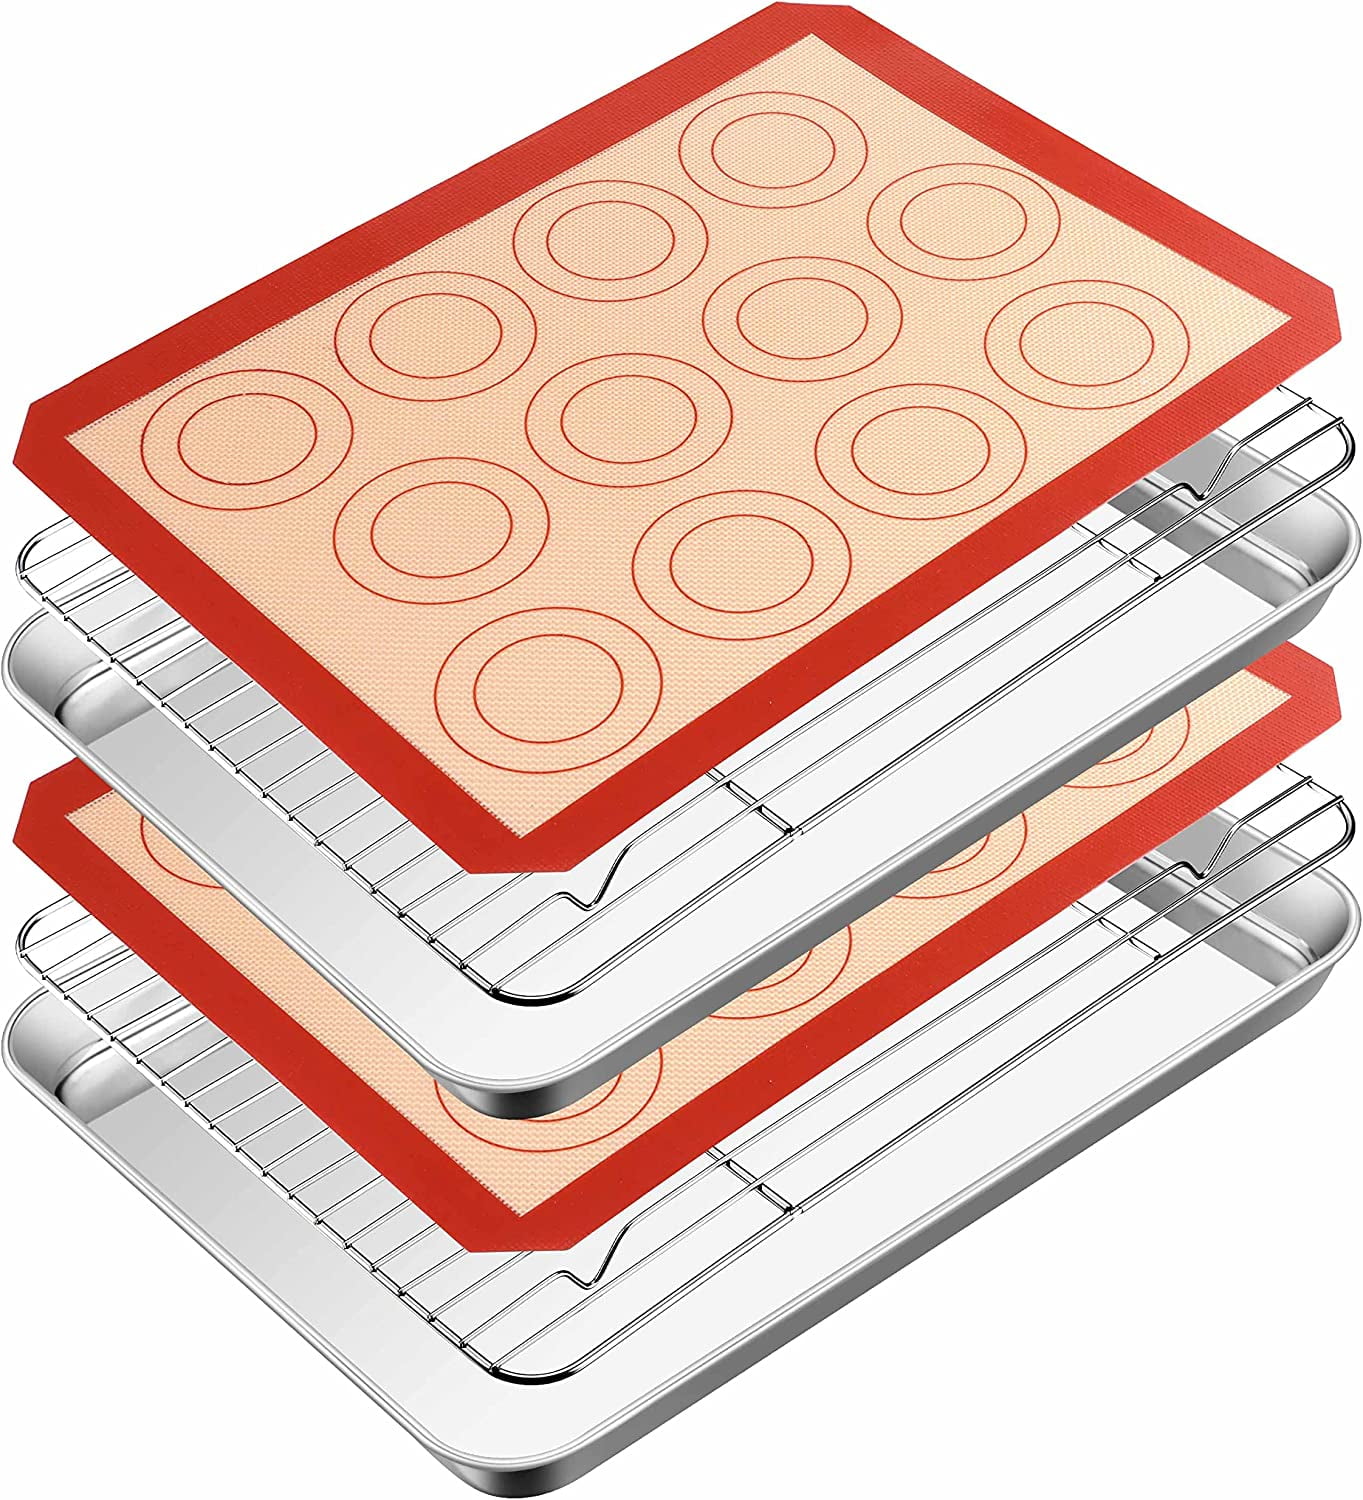 Wildone Baking Sheet with Silicone Mat Set, Stainless Steel Cookie Pan with Baking Mat, Size 16 x 12 x 1 inch, Set of 4 - 2 Sheets + 2 Mats